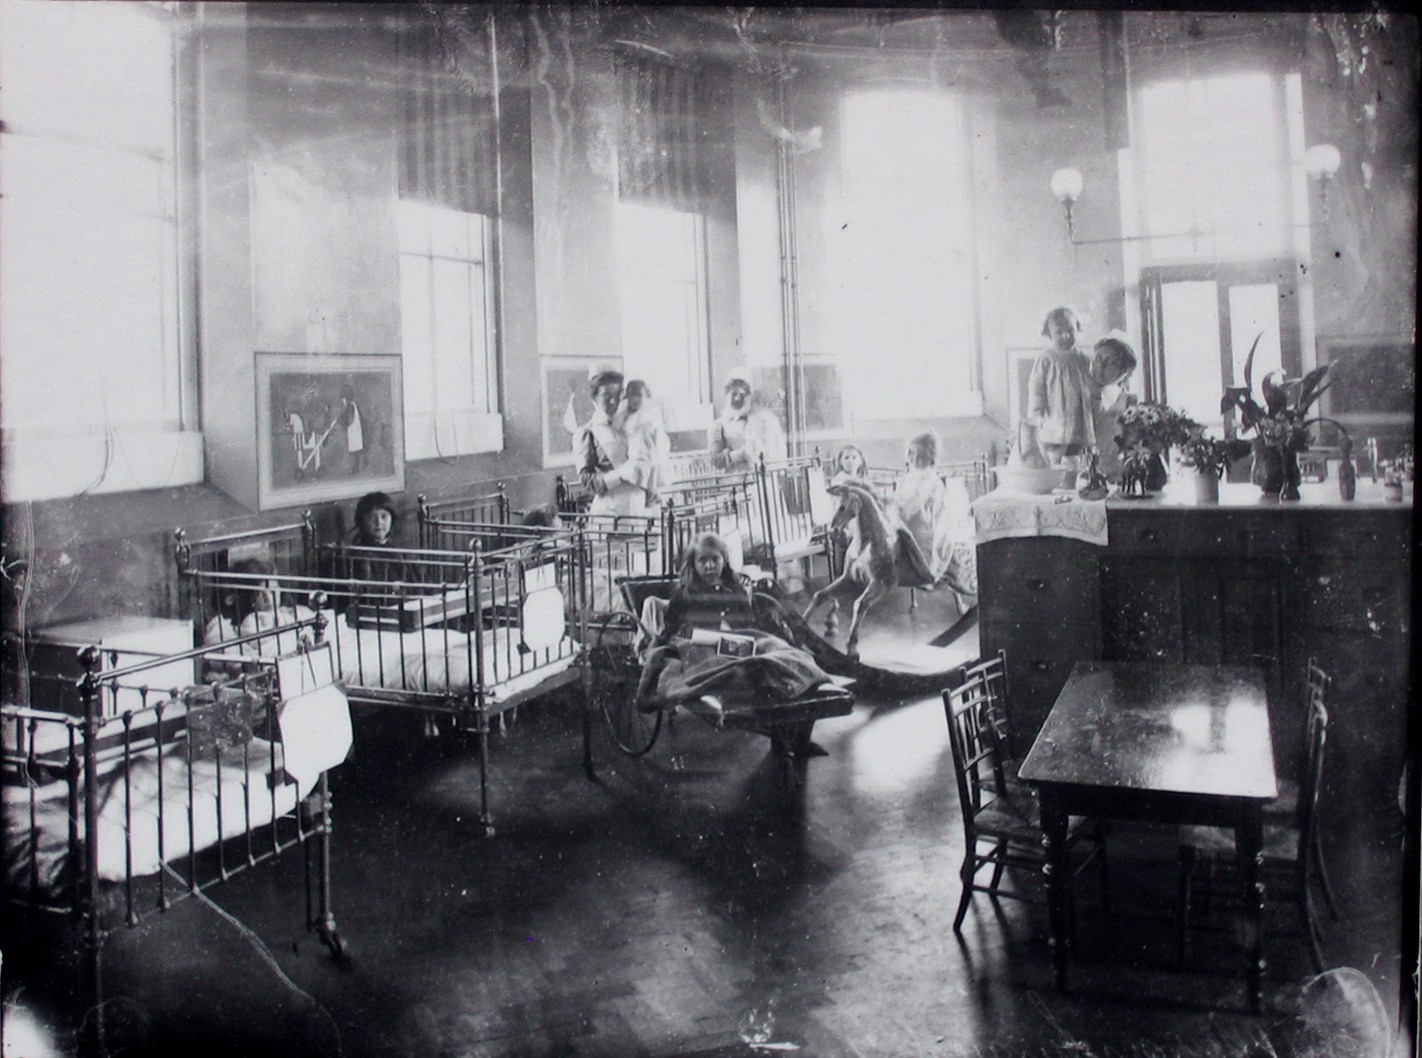 Children’s ward, c1890 - The Collection of University Hospitals of Leicester NHS Trust